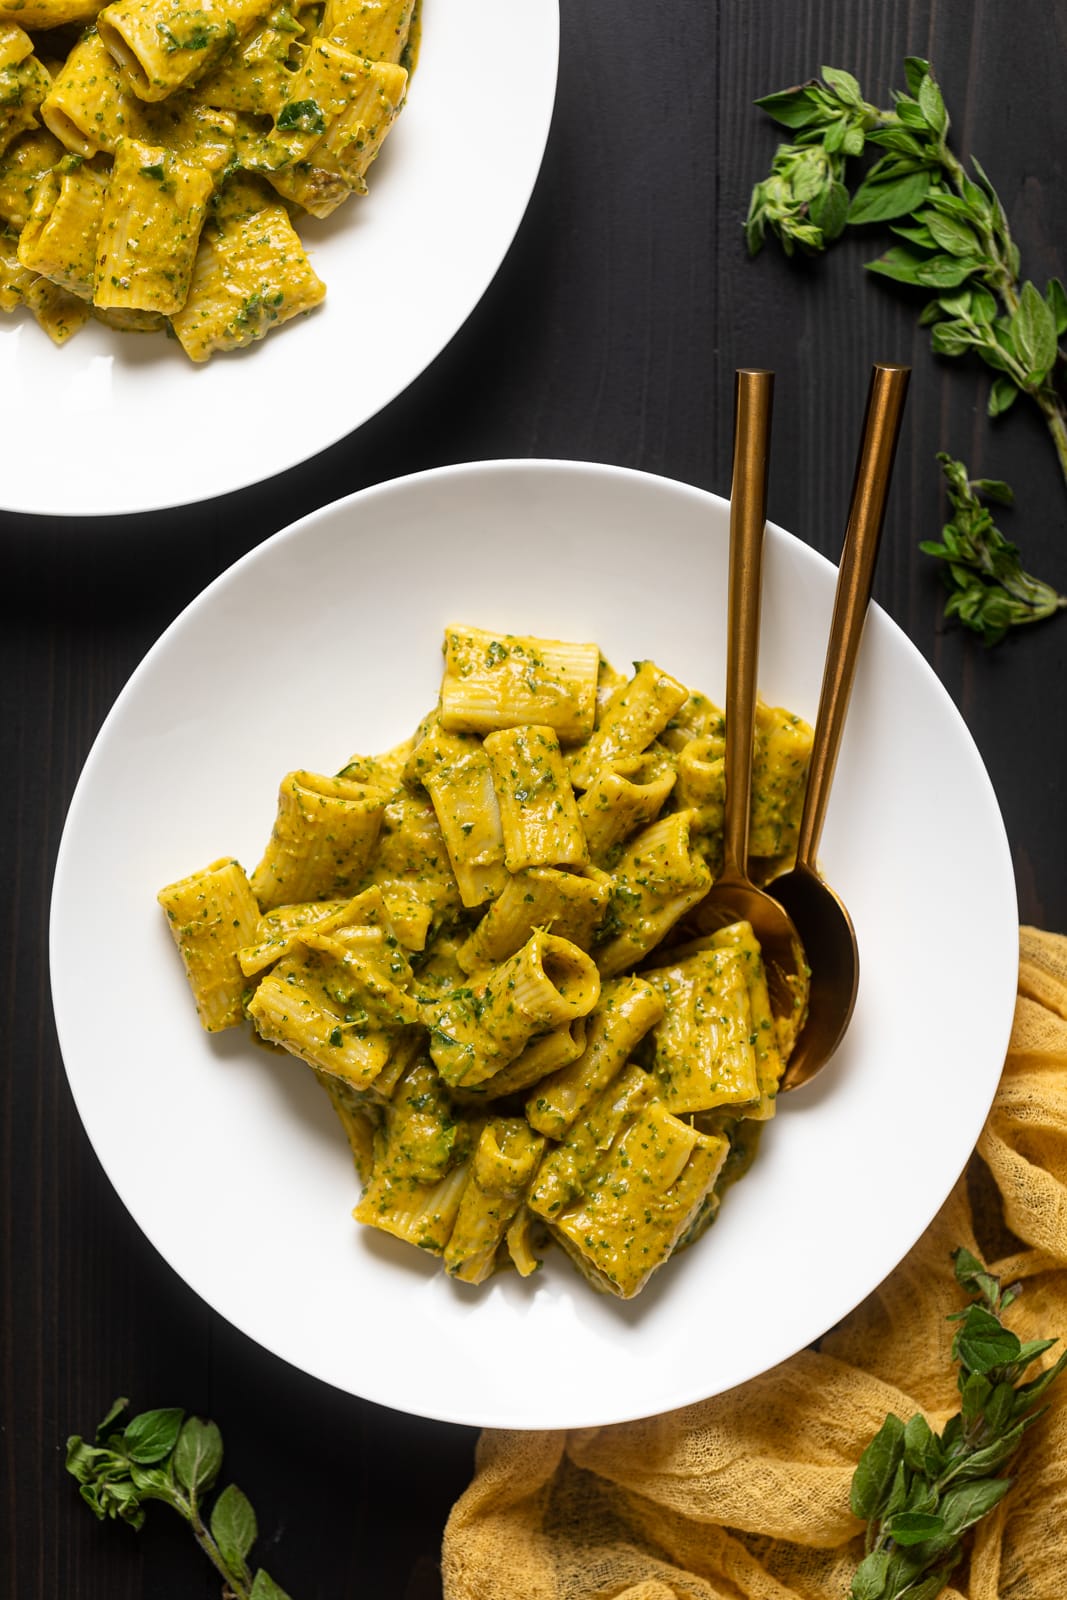 Pasta With Kale Sauce: A Delectable Twist for Your Taste Buds